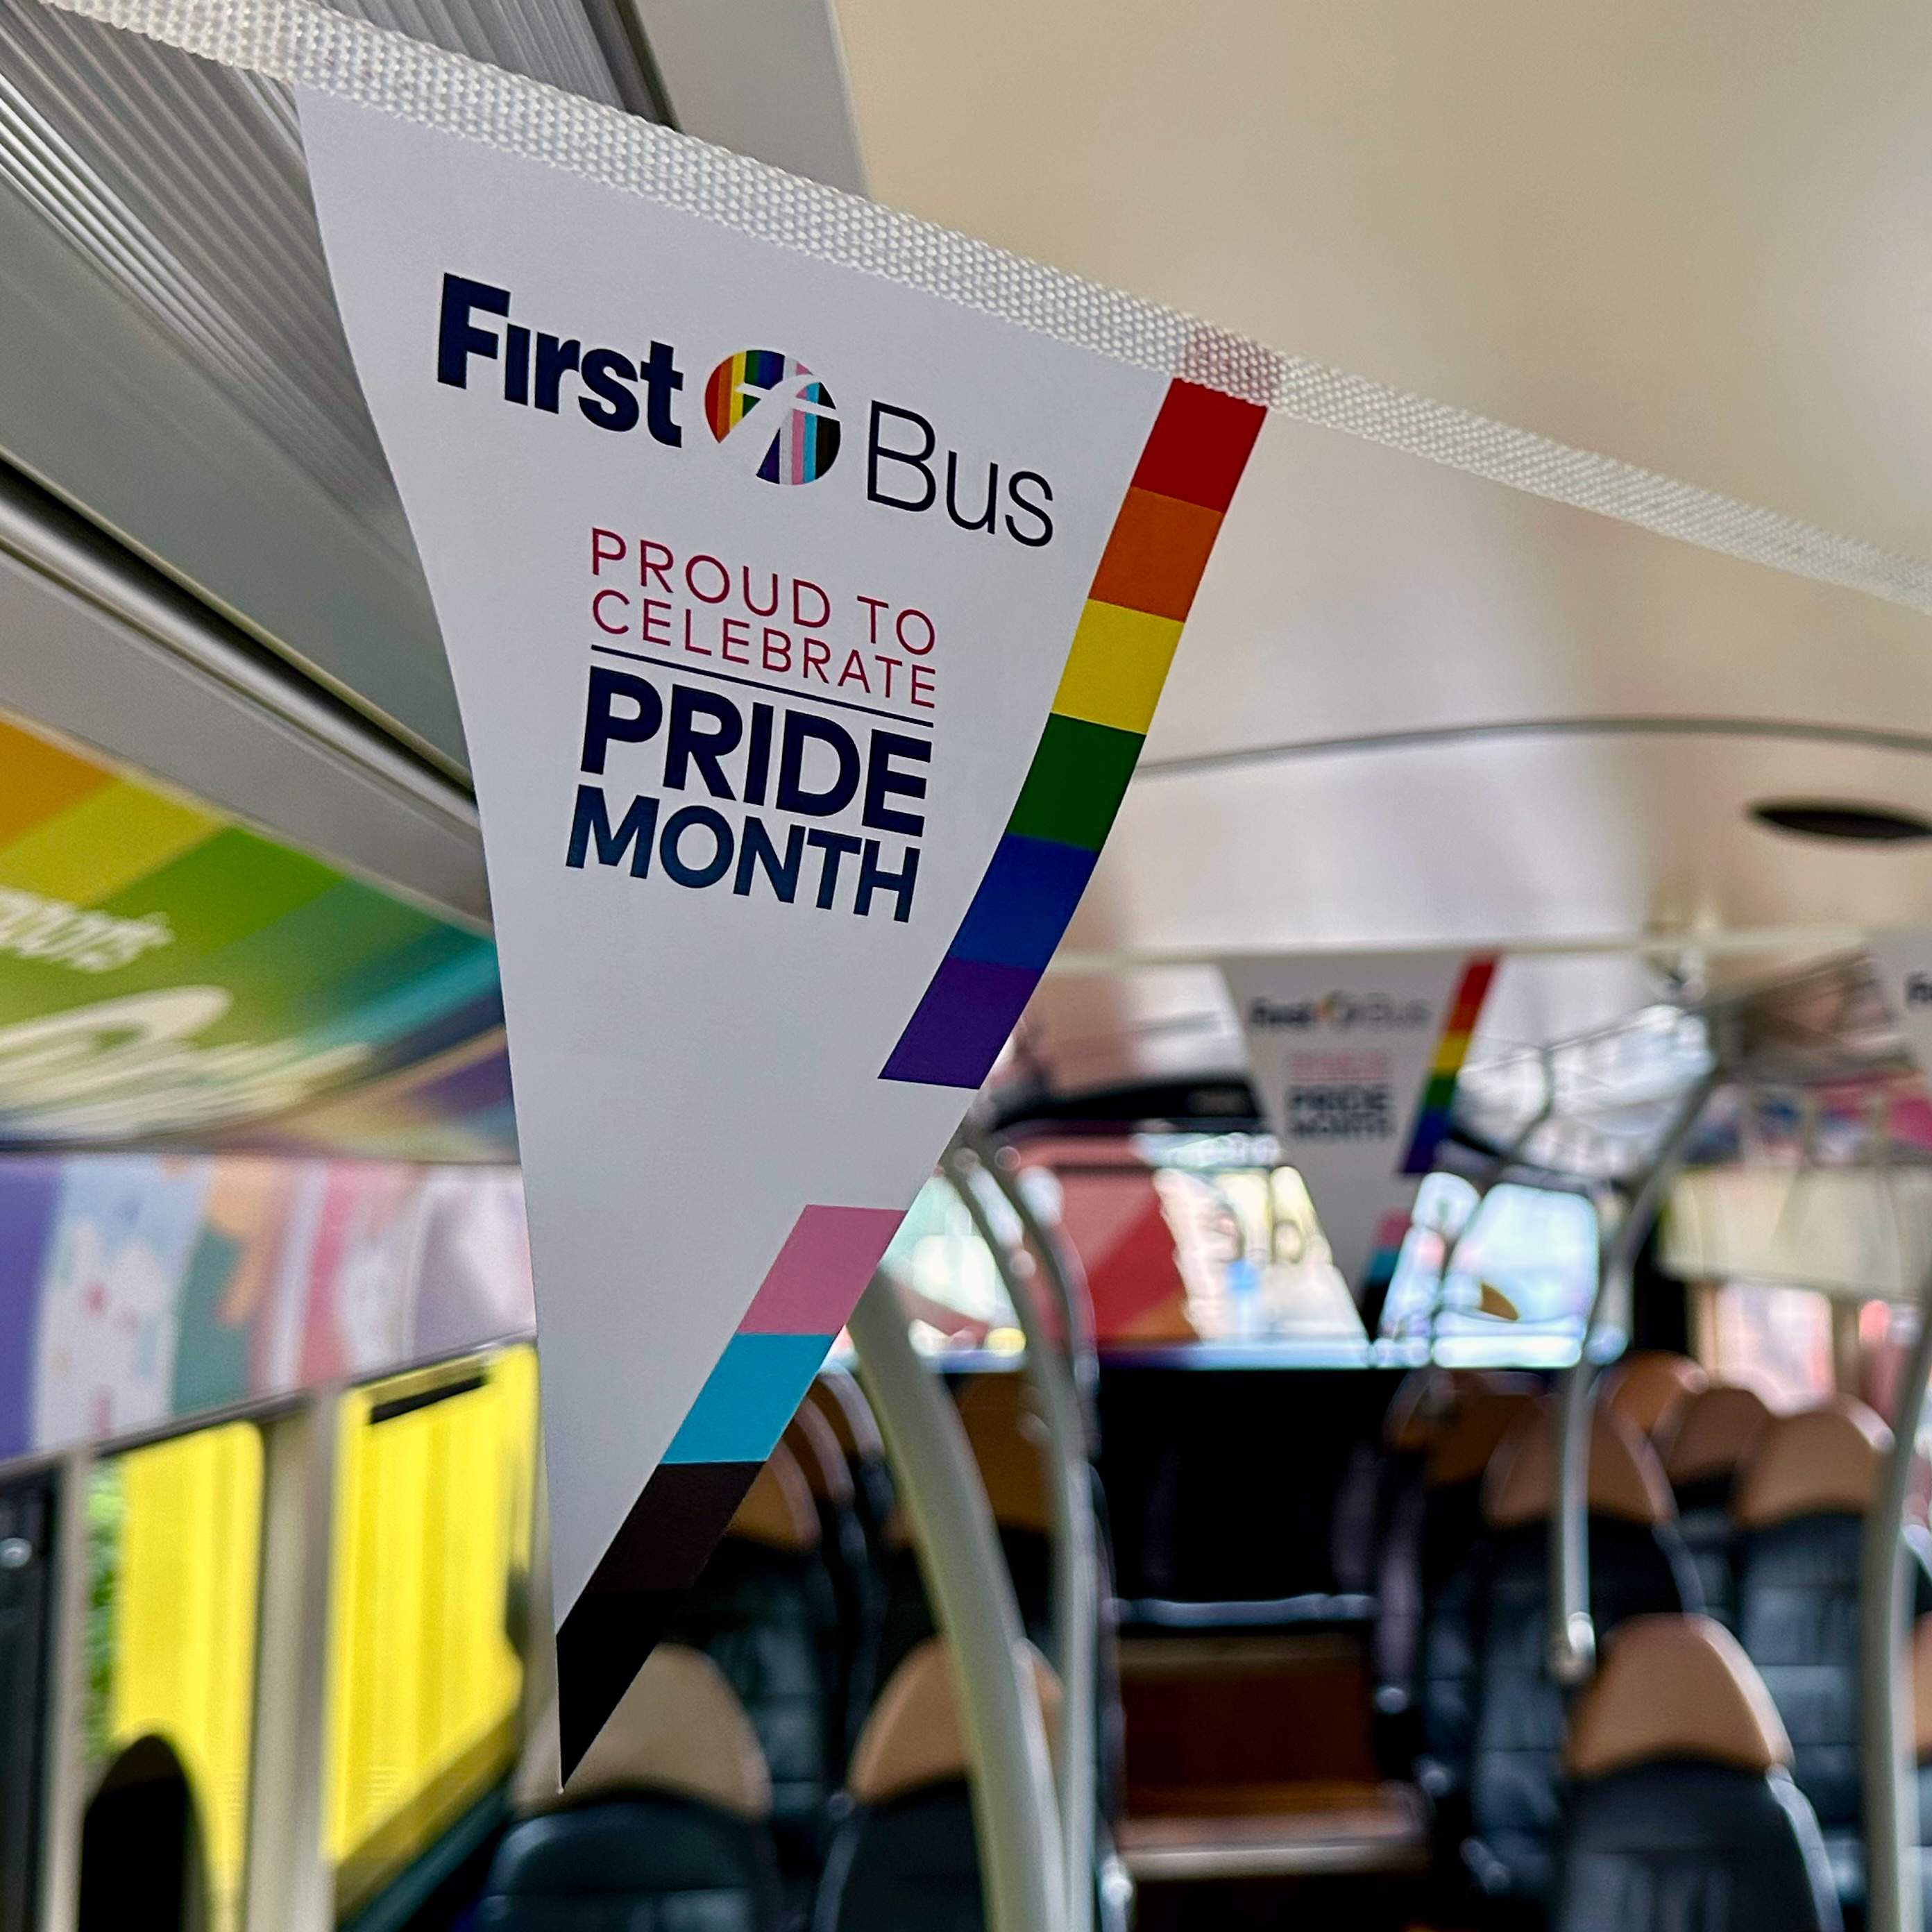 Pride month bunting inside the bus.